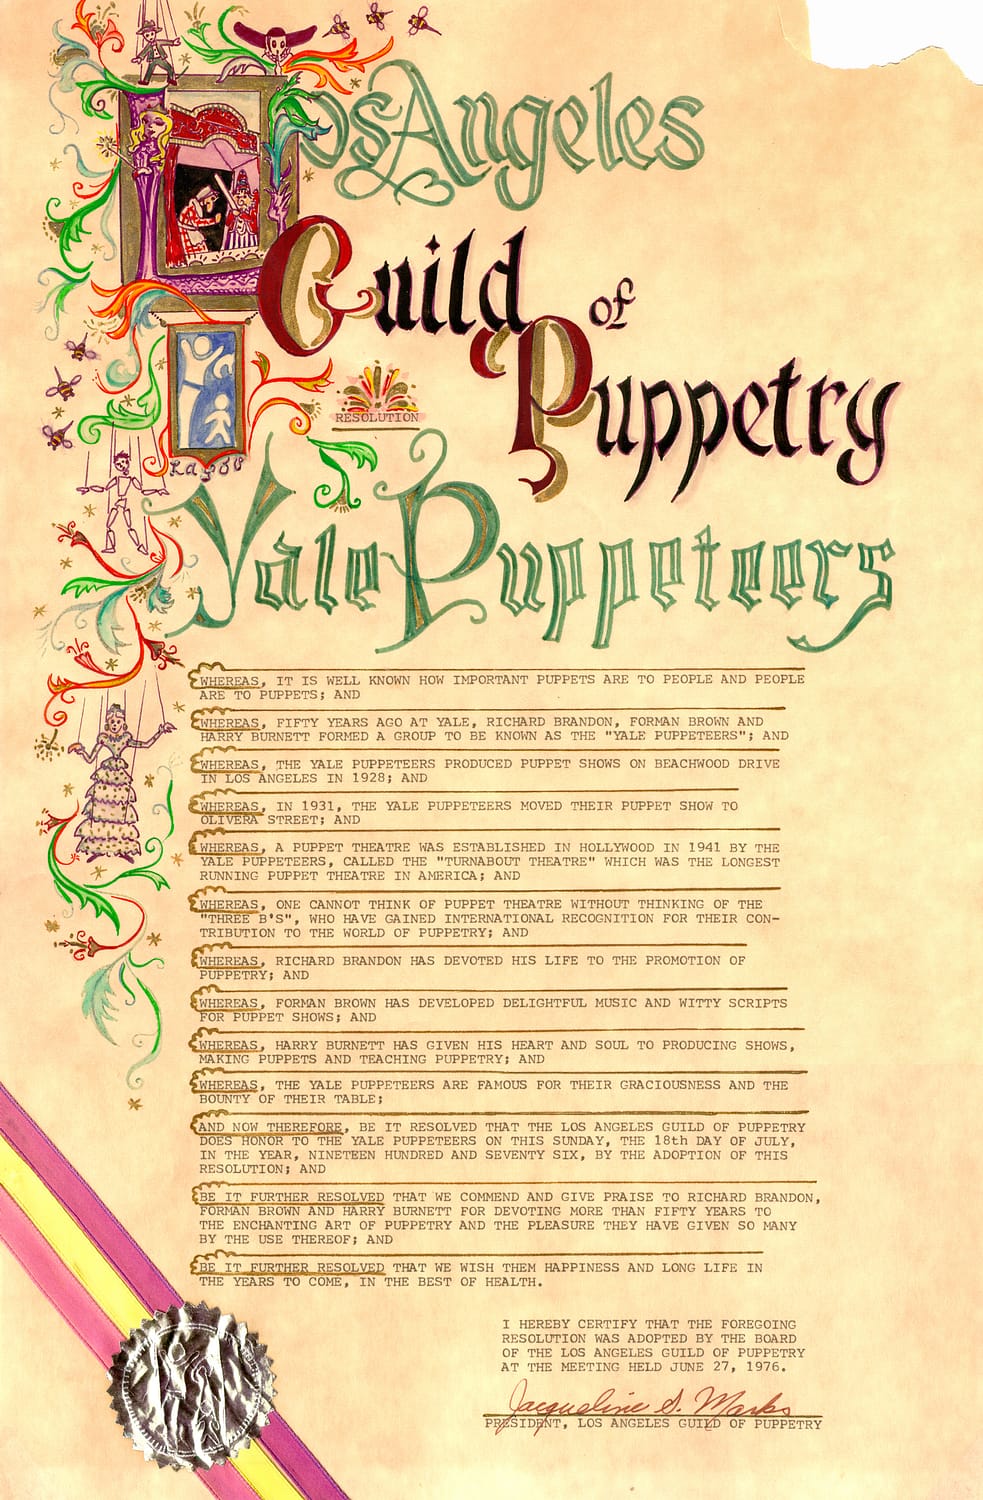 Los Angeles Guild of Puppetry Proclamation Certificate